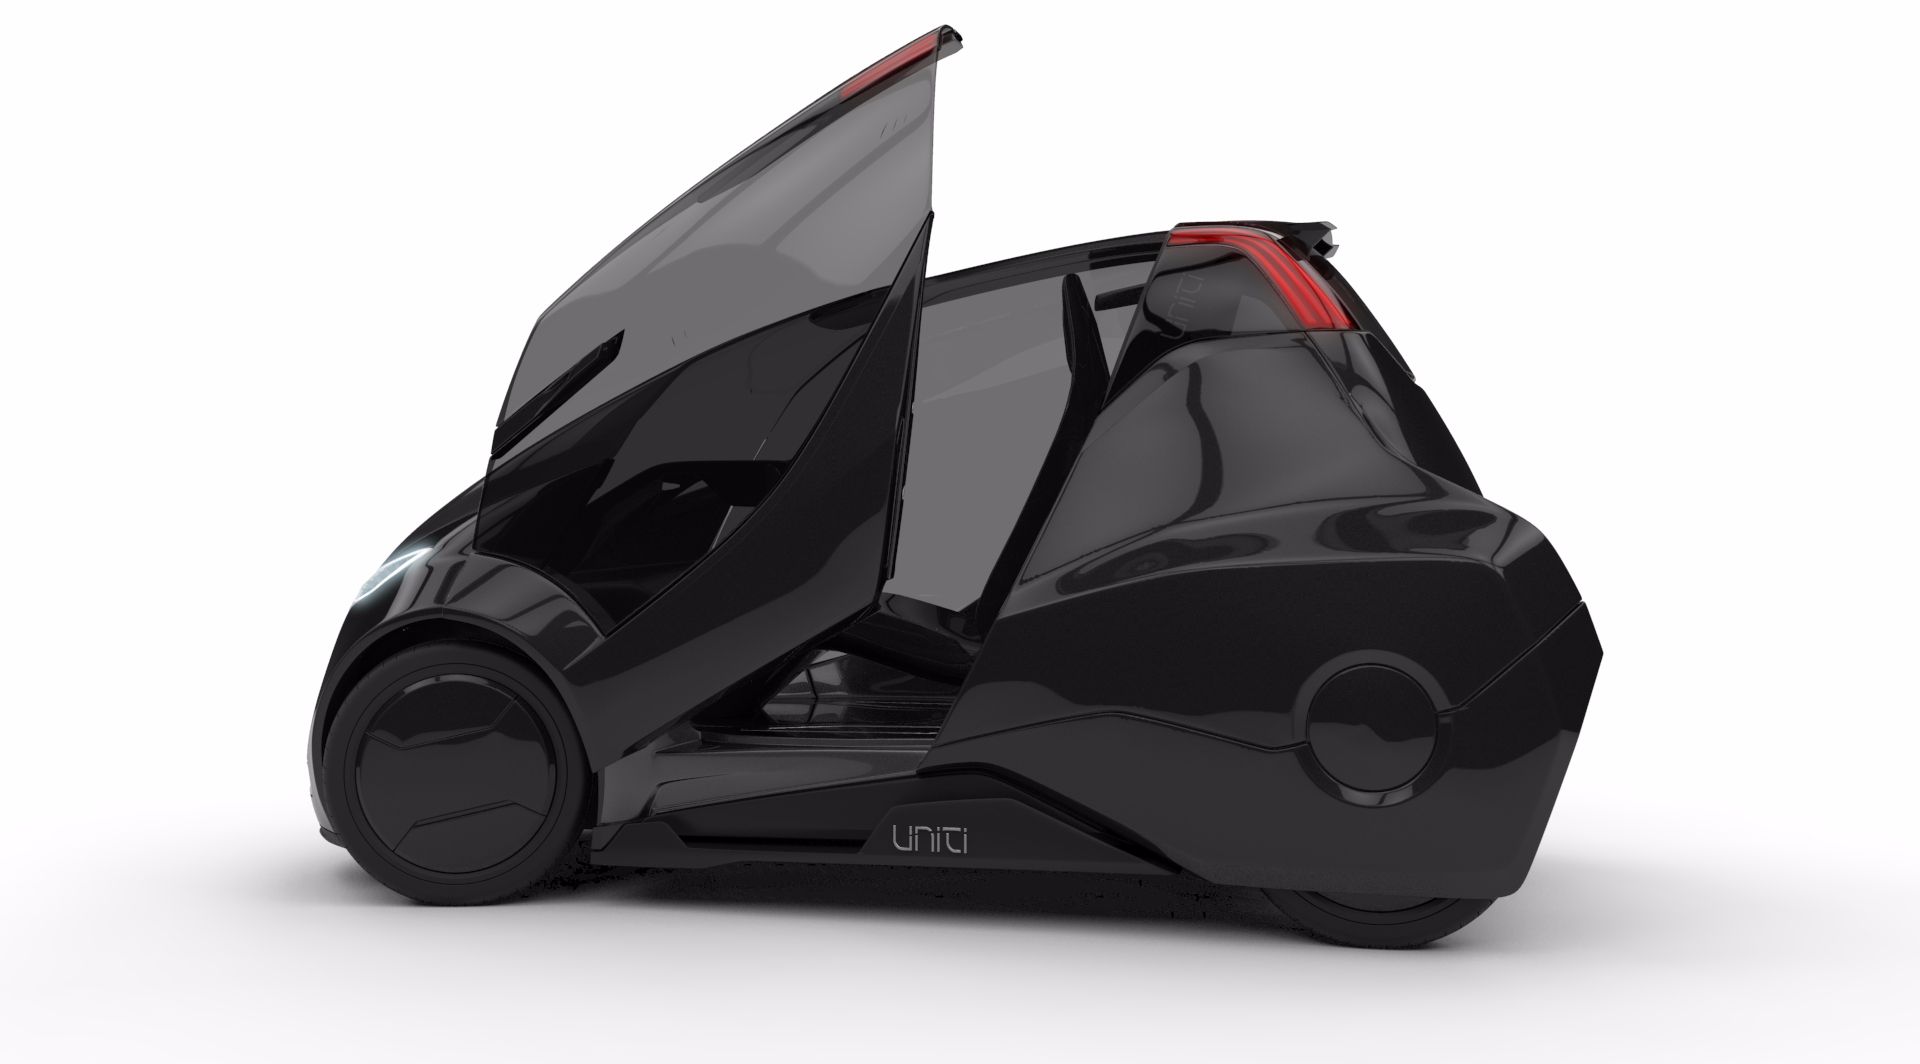 Crowdfunded electric car to be manufactured in fully automated factory